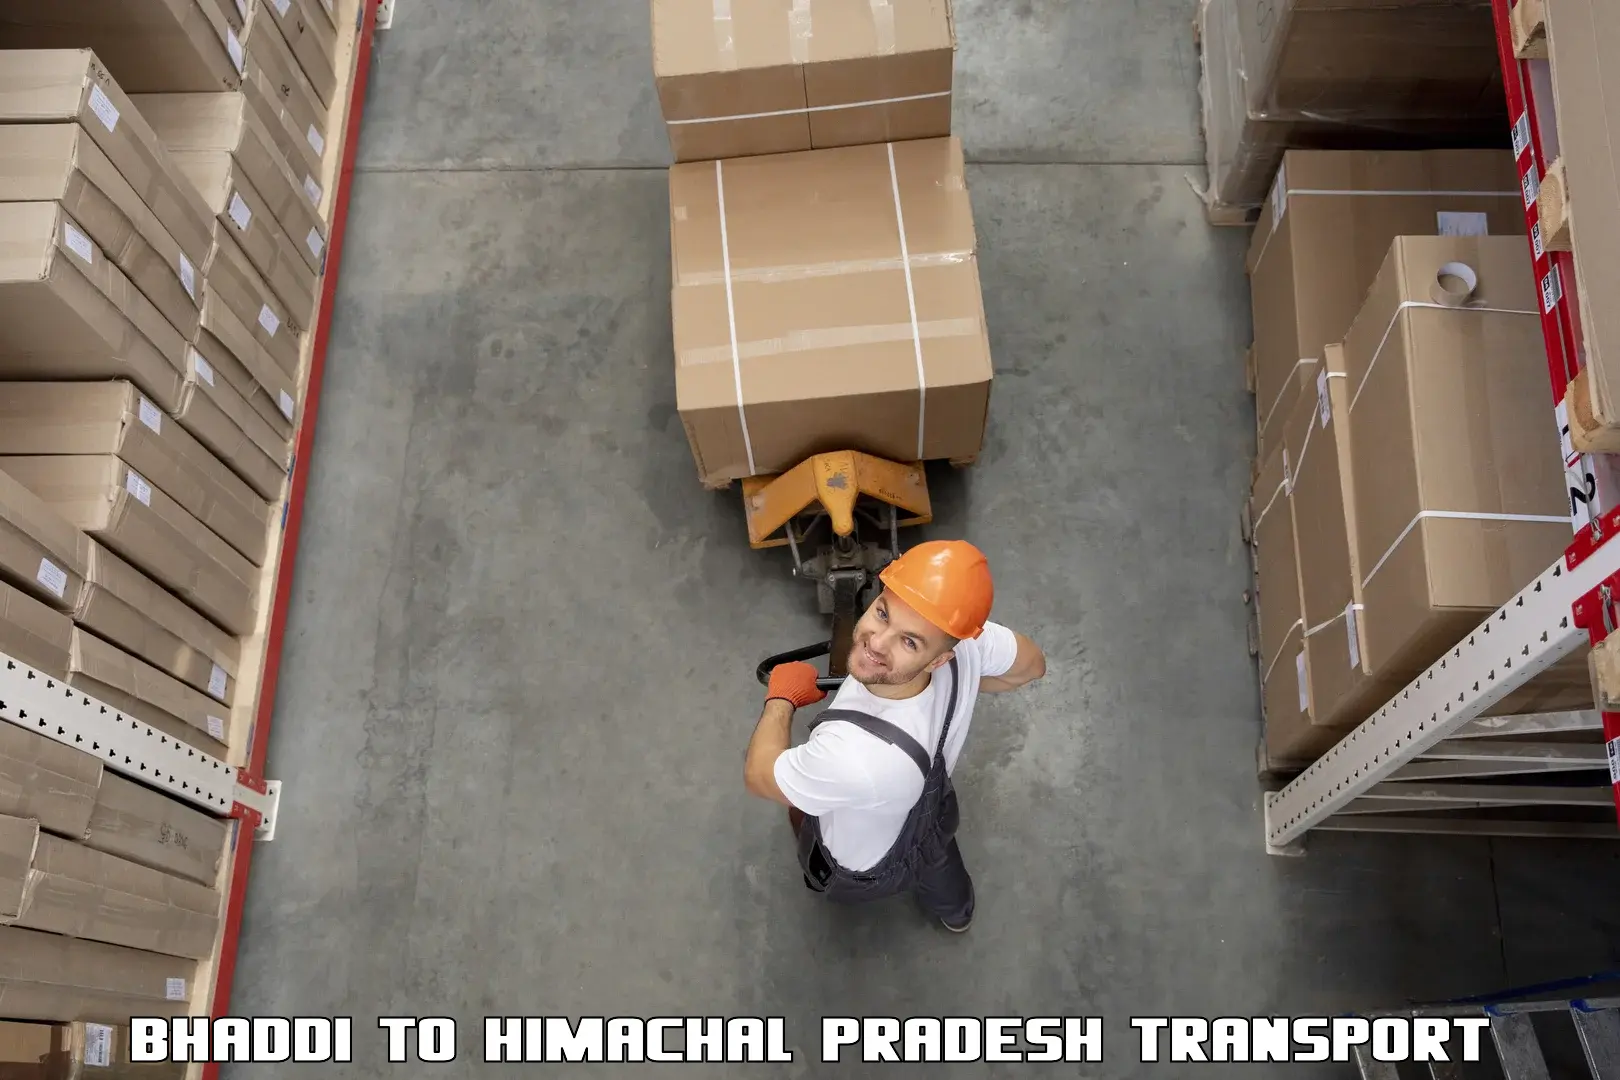 Truck transport companies in India Bhaddi to Kyelang